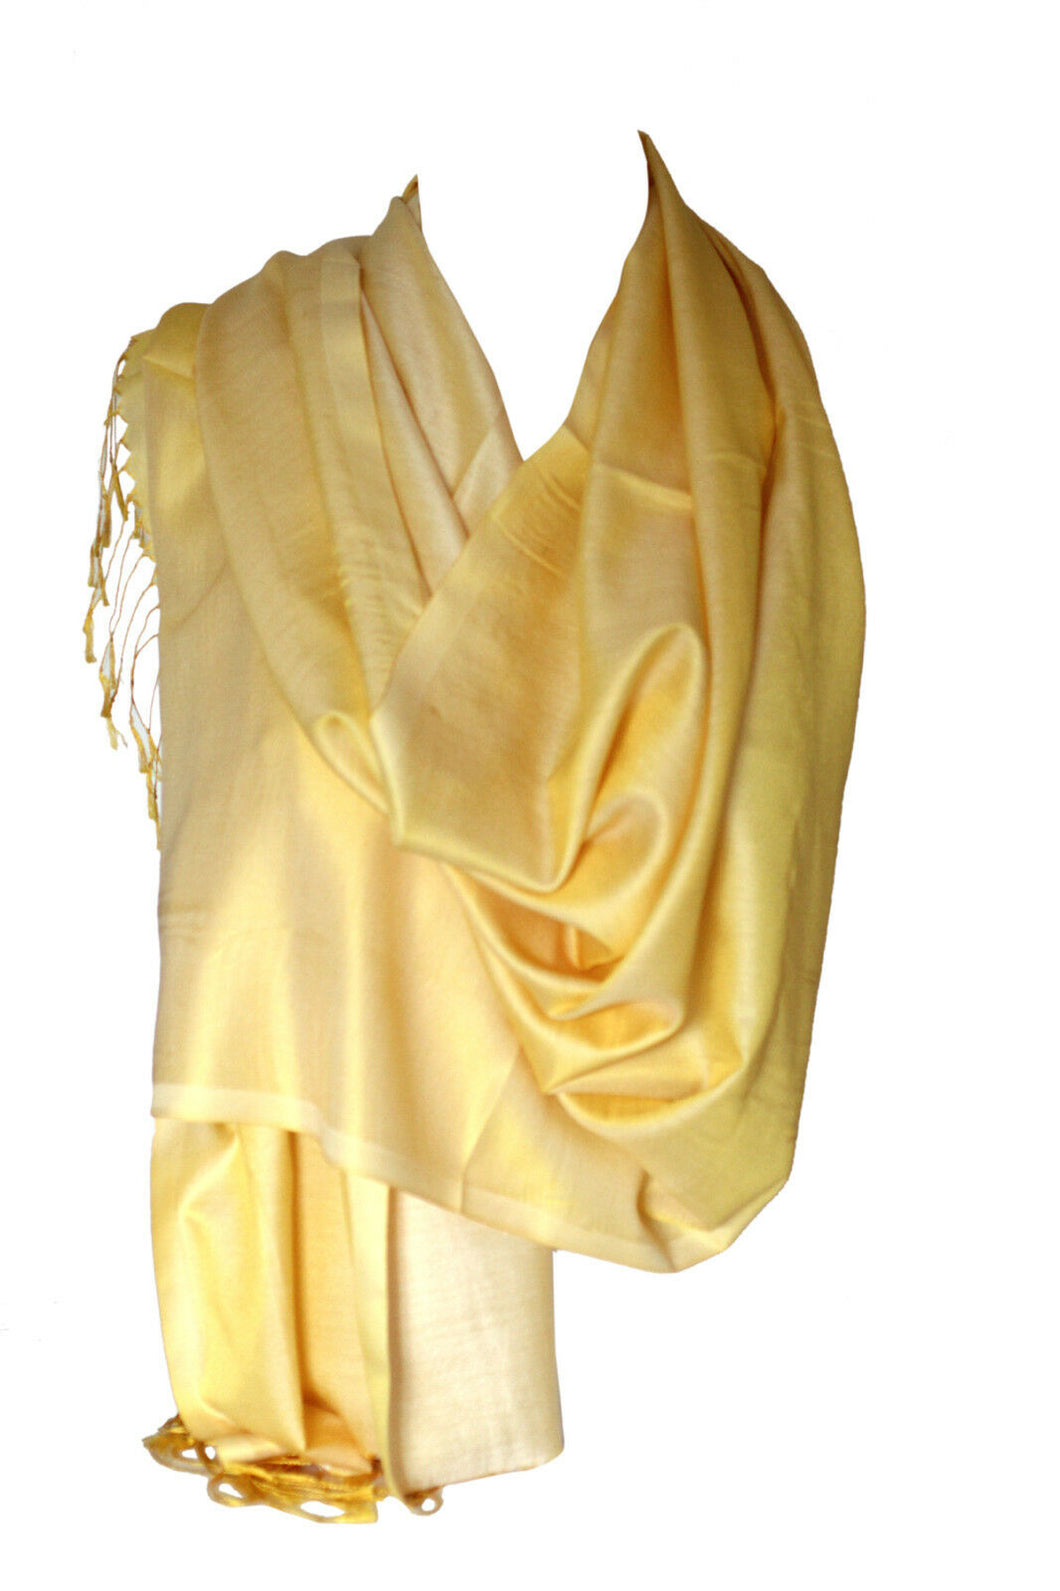 Reversible Two-Sided Silk Wrap Scarf / Shawl